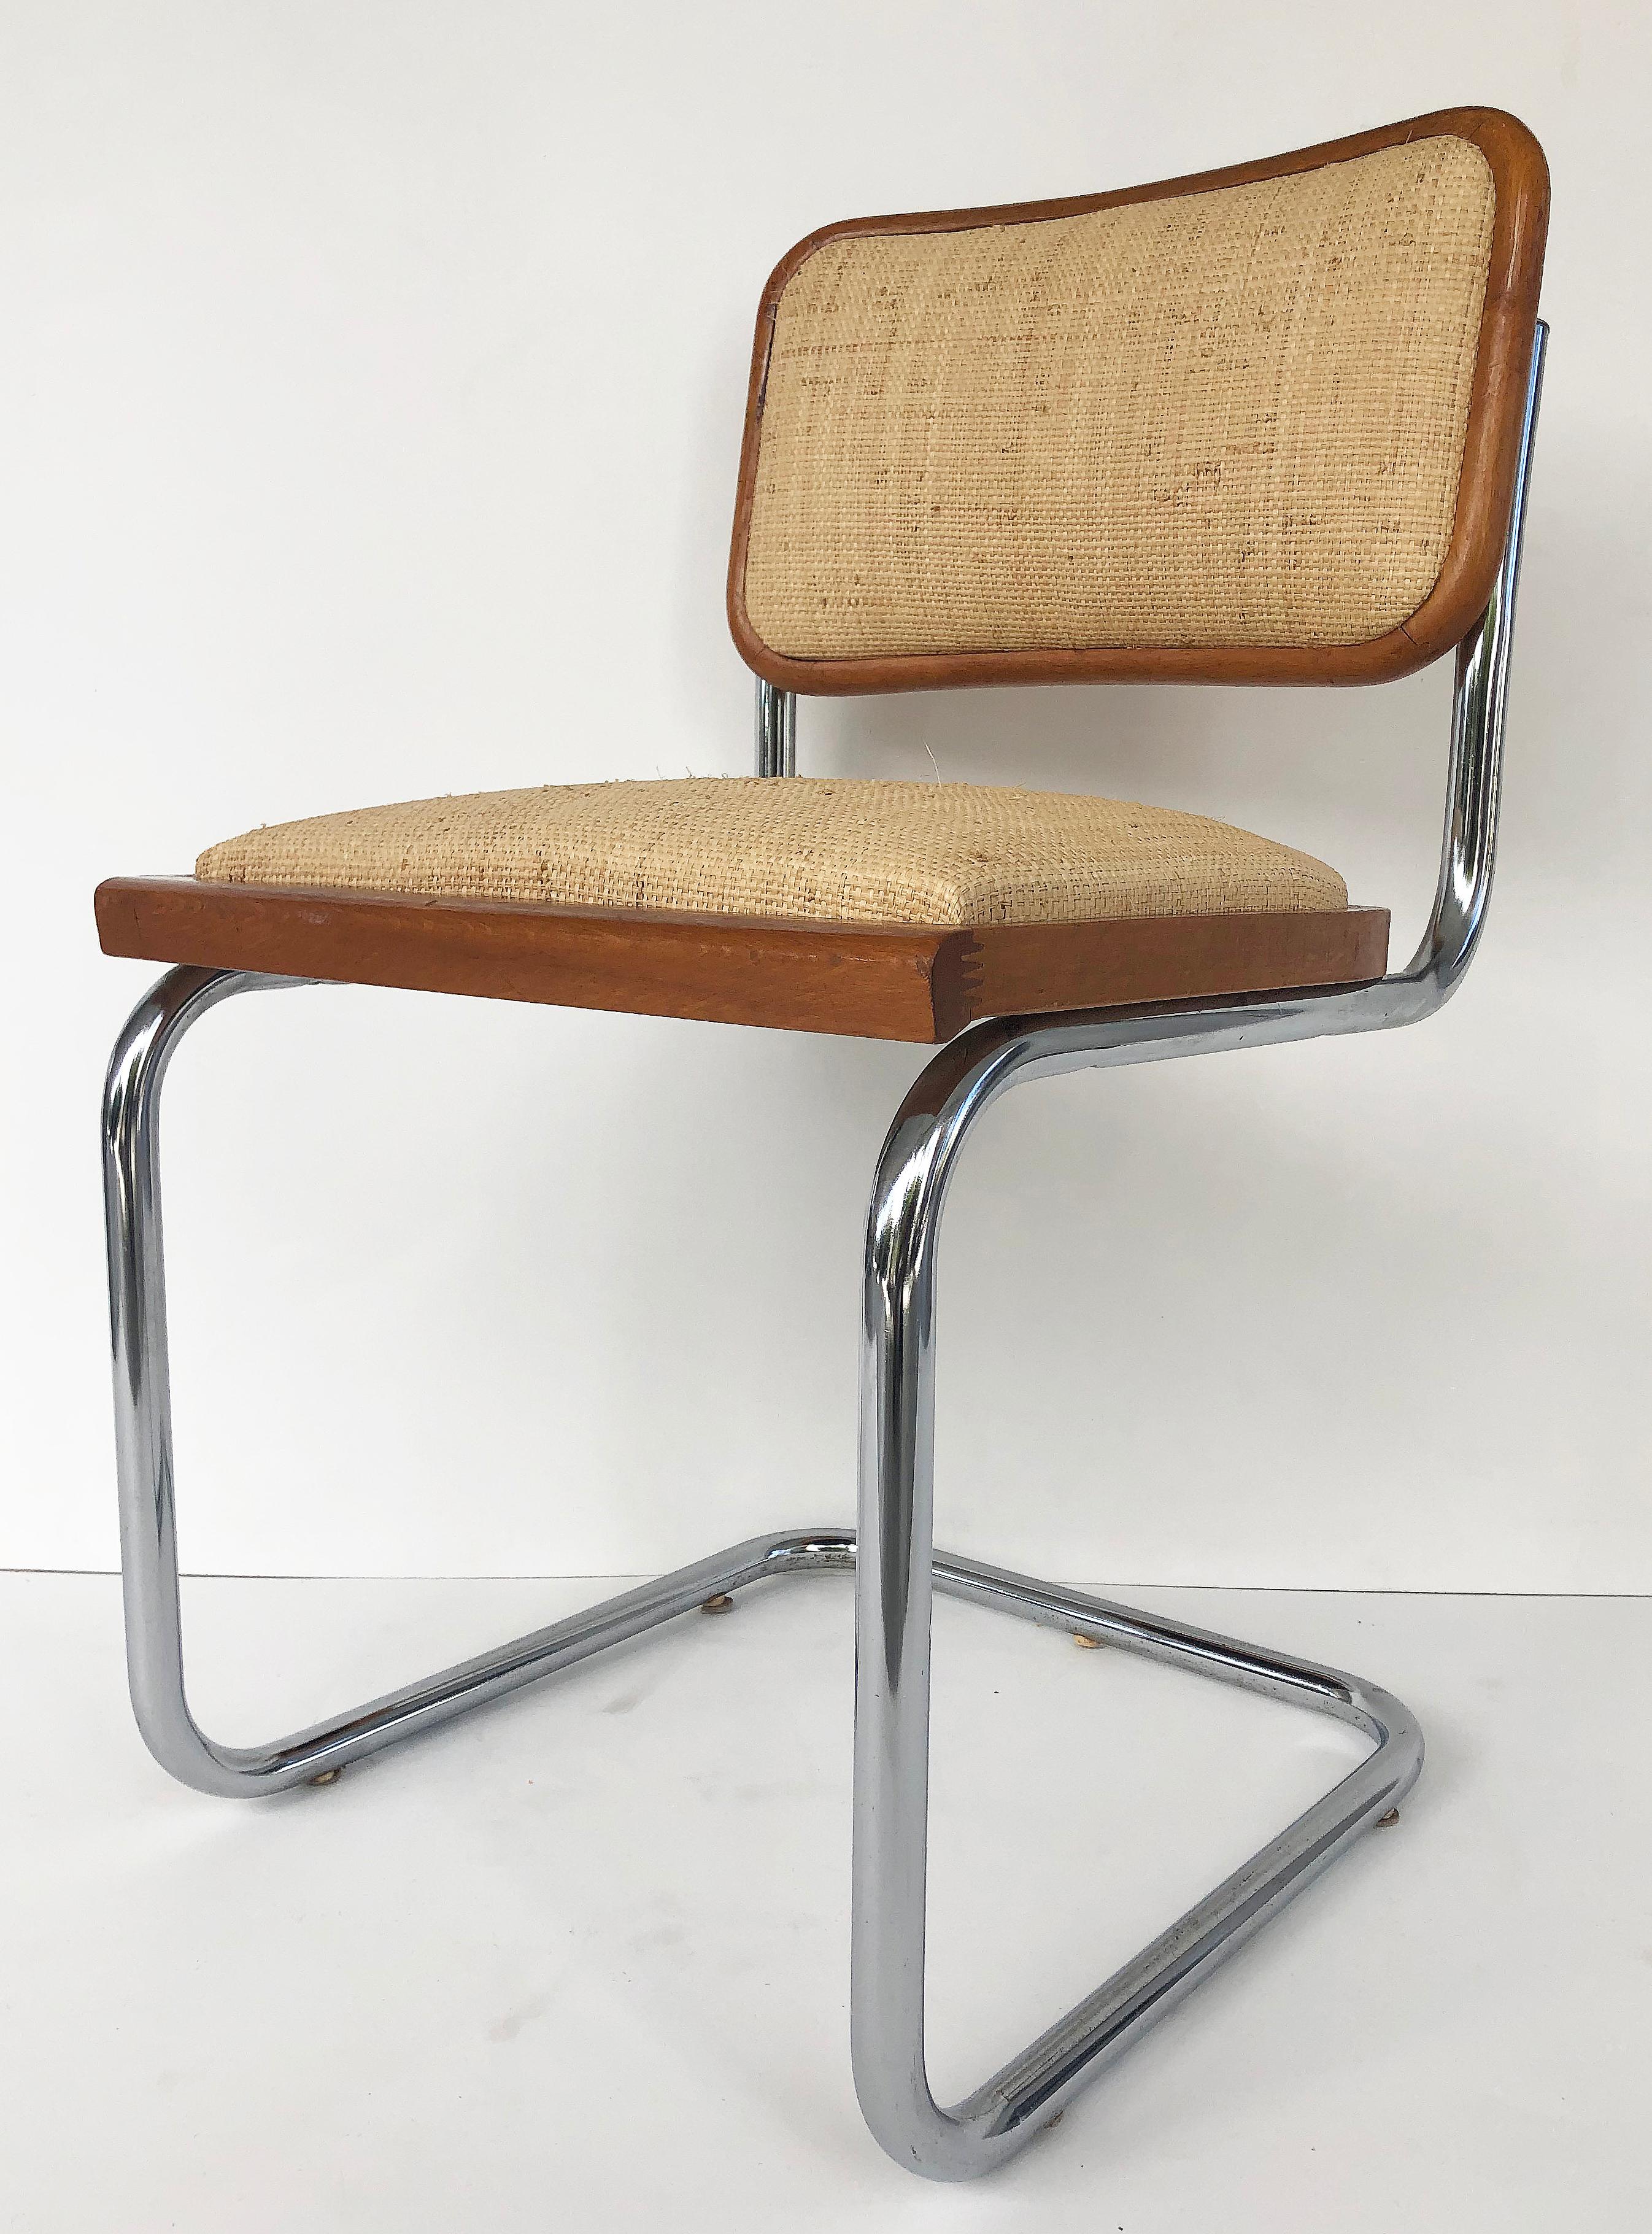 Mid-Century Modern Marcel Breuer Knoll Chrome Cesca Chairs Upholstered in Raffia, Set of Four